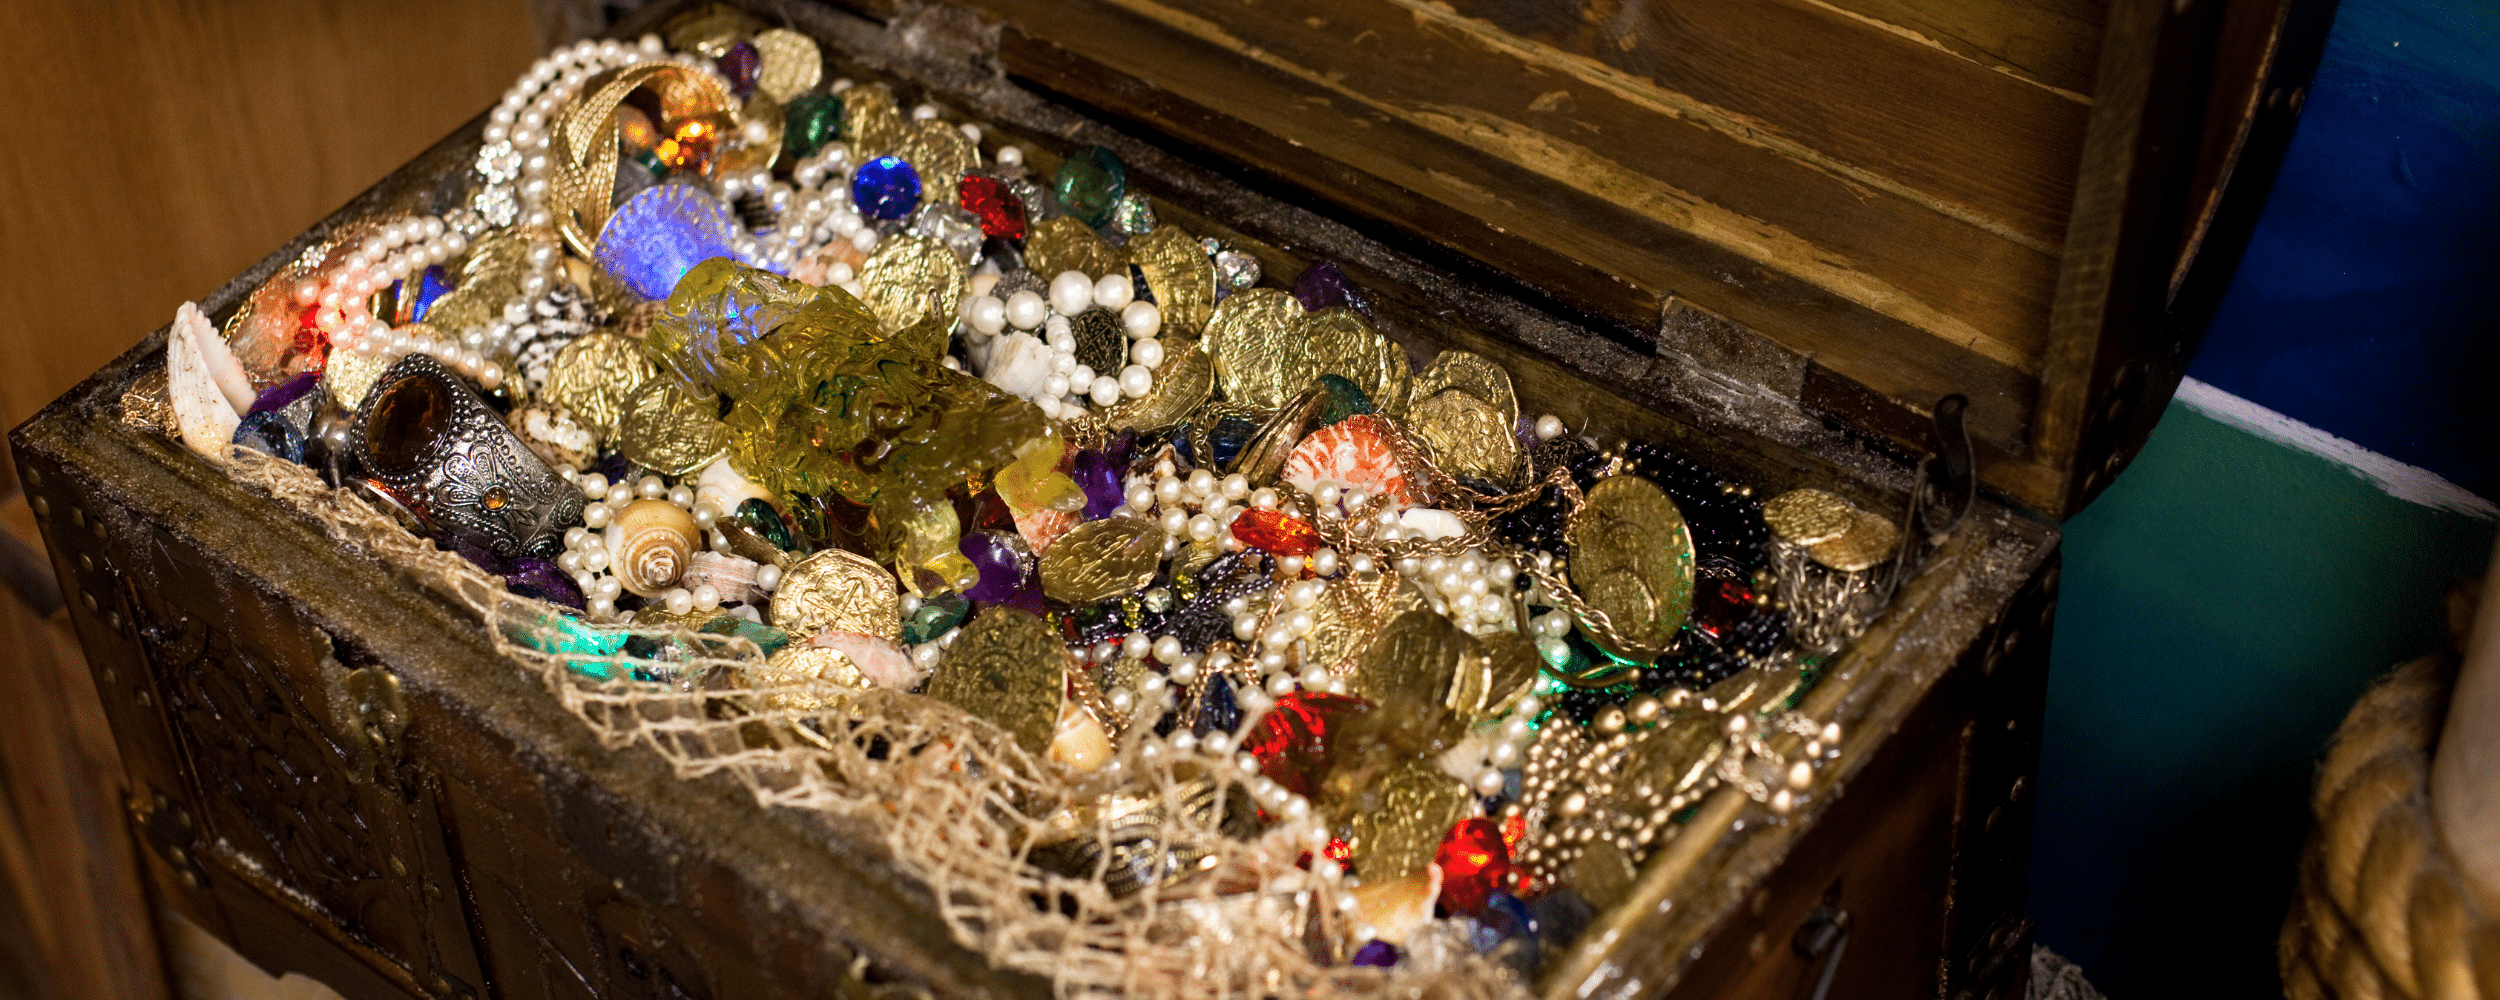 chest filled with gold and precious jewels